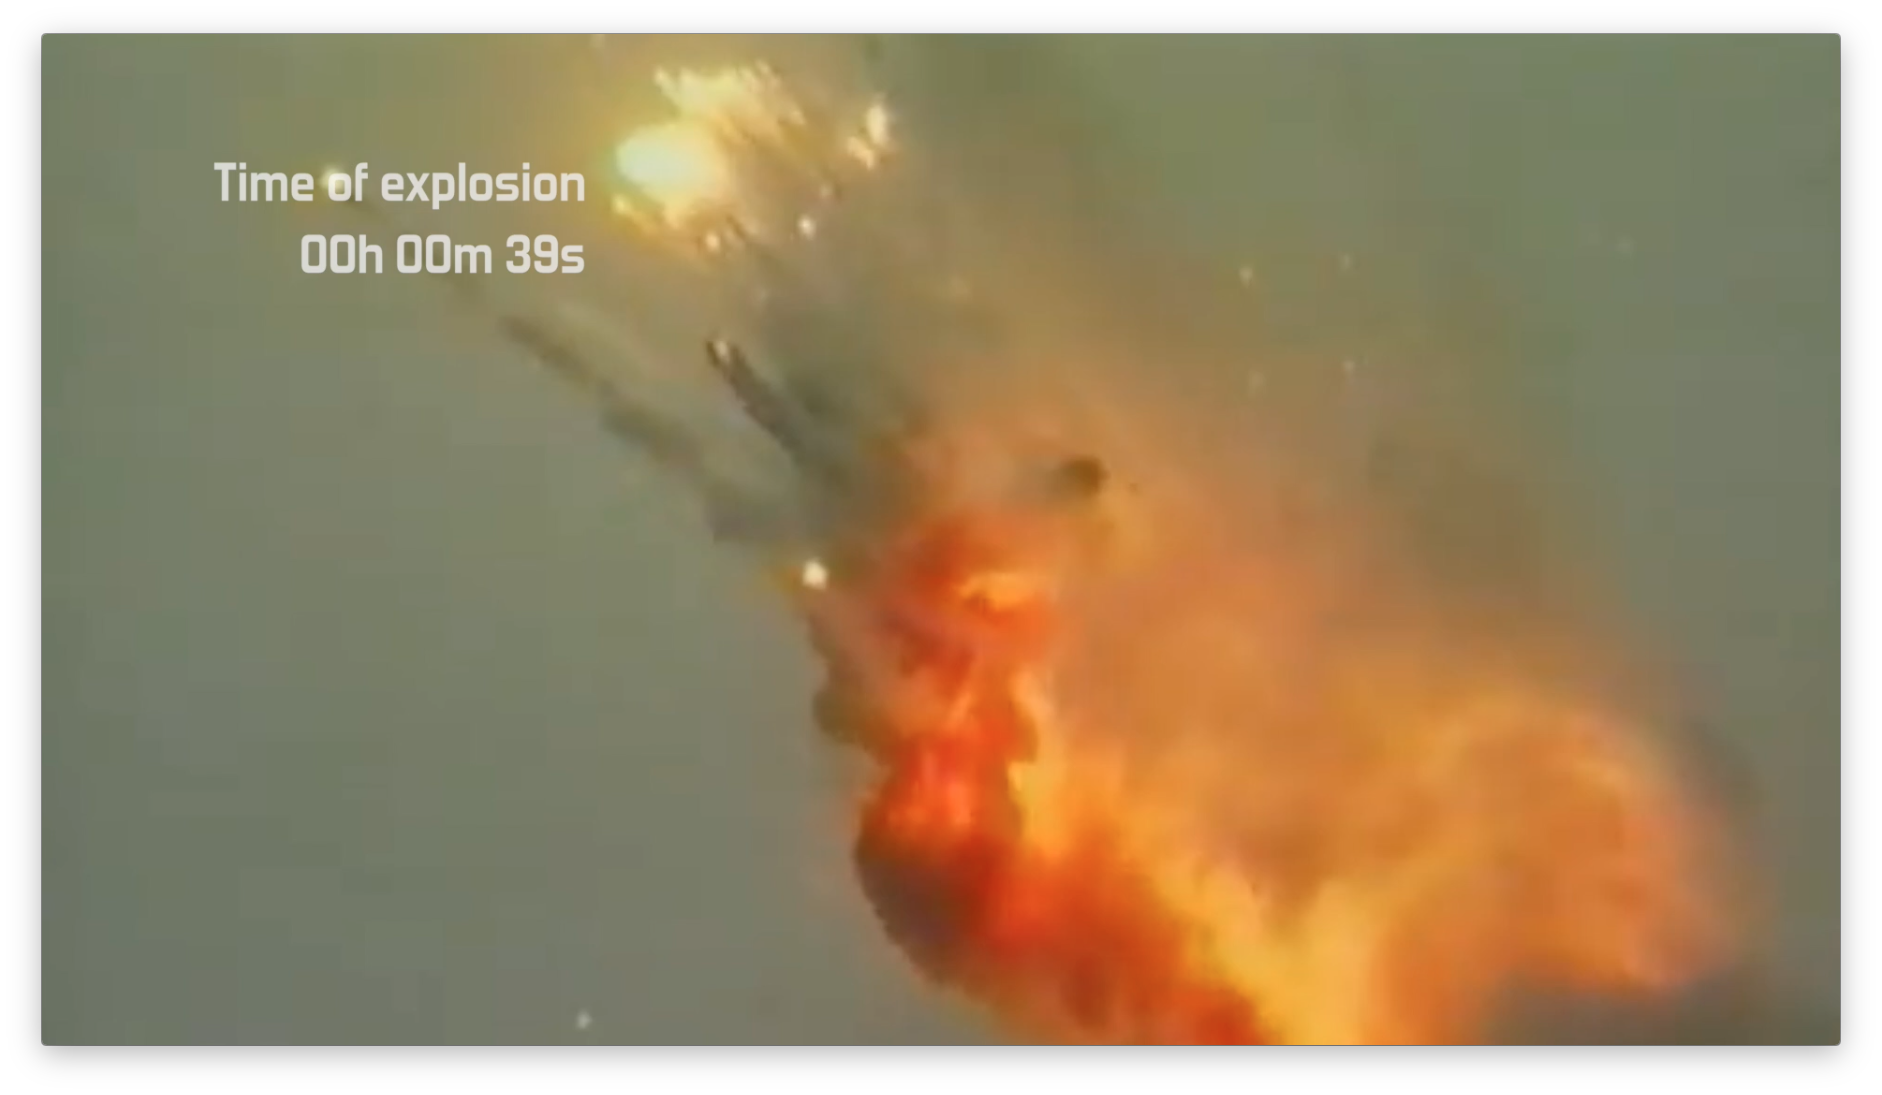 The explosion of Ariane 5